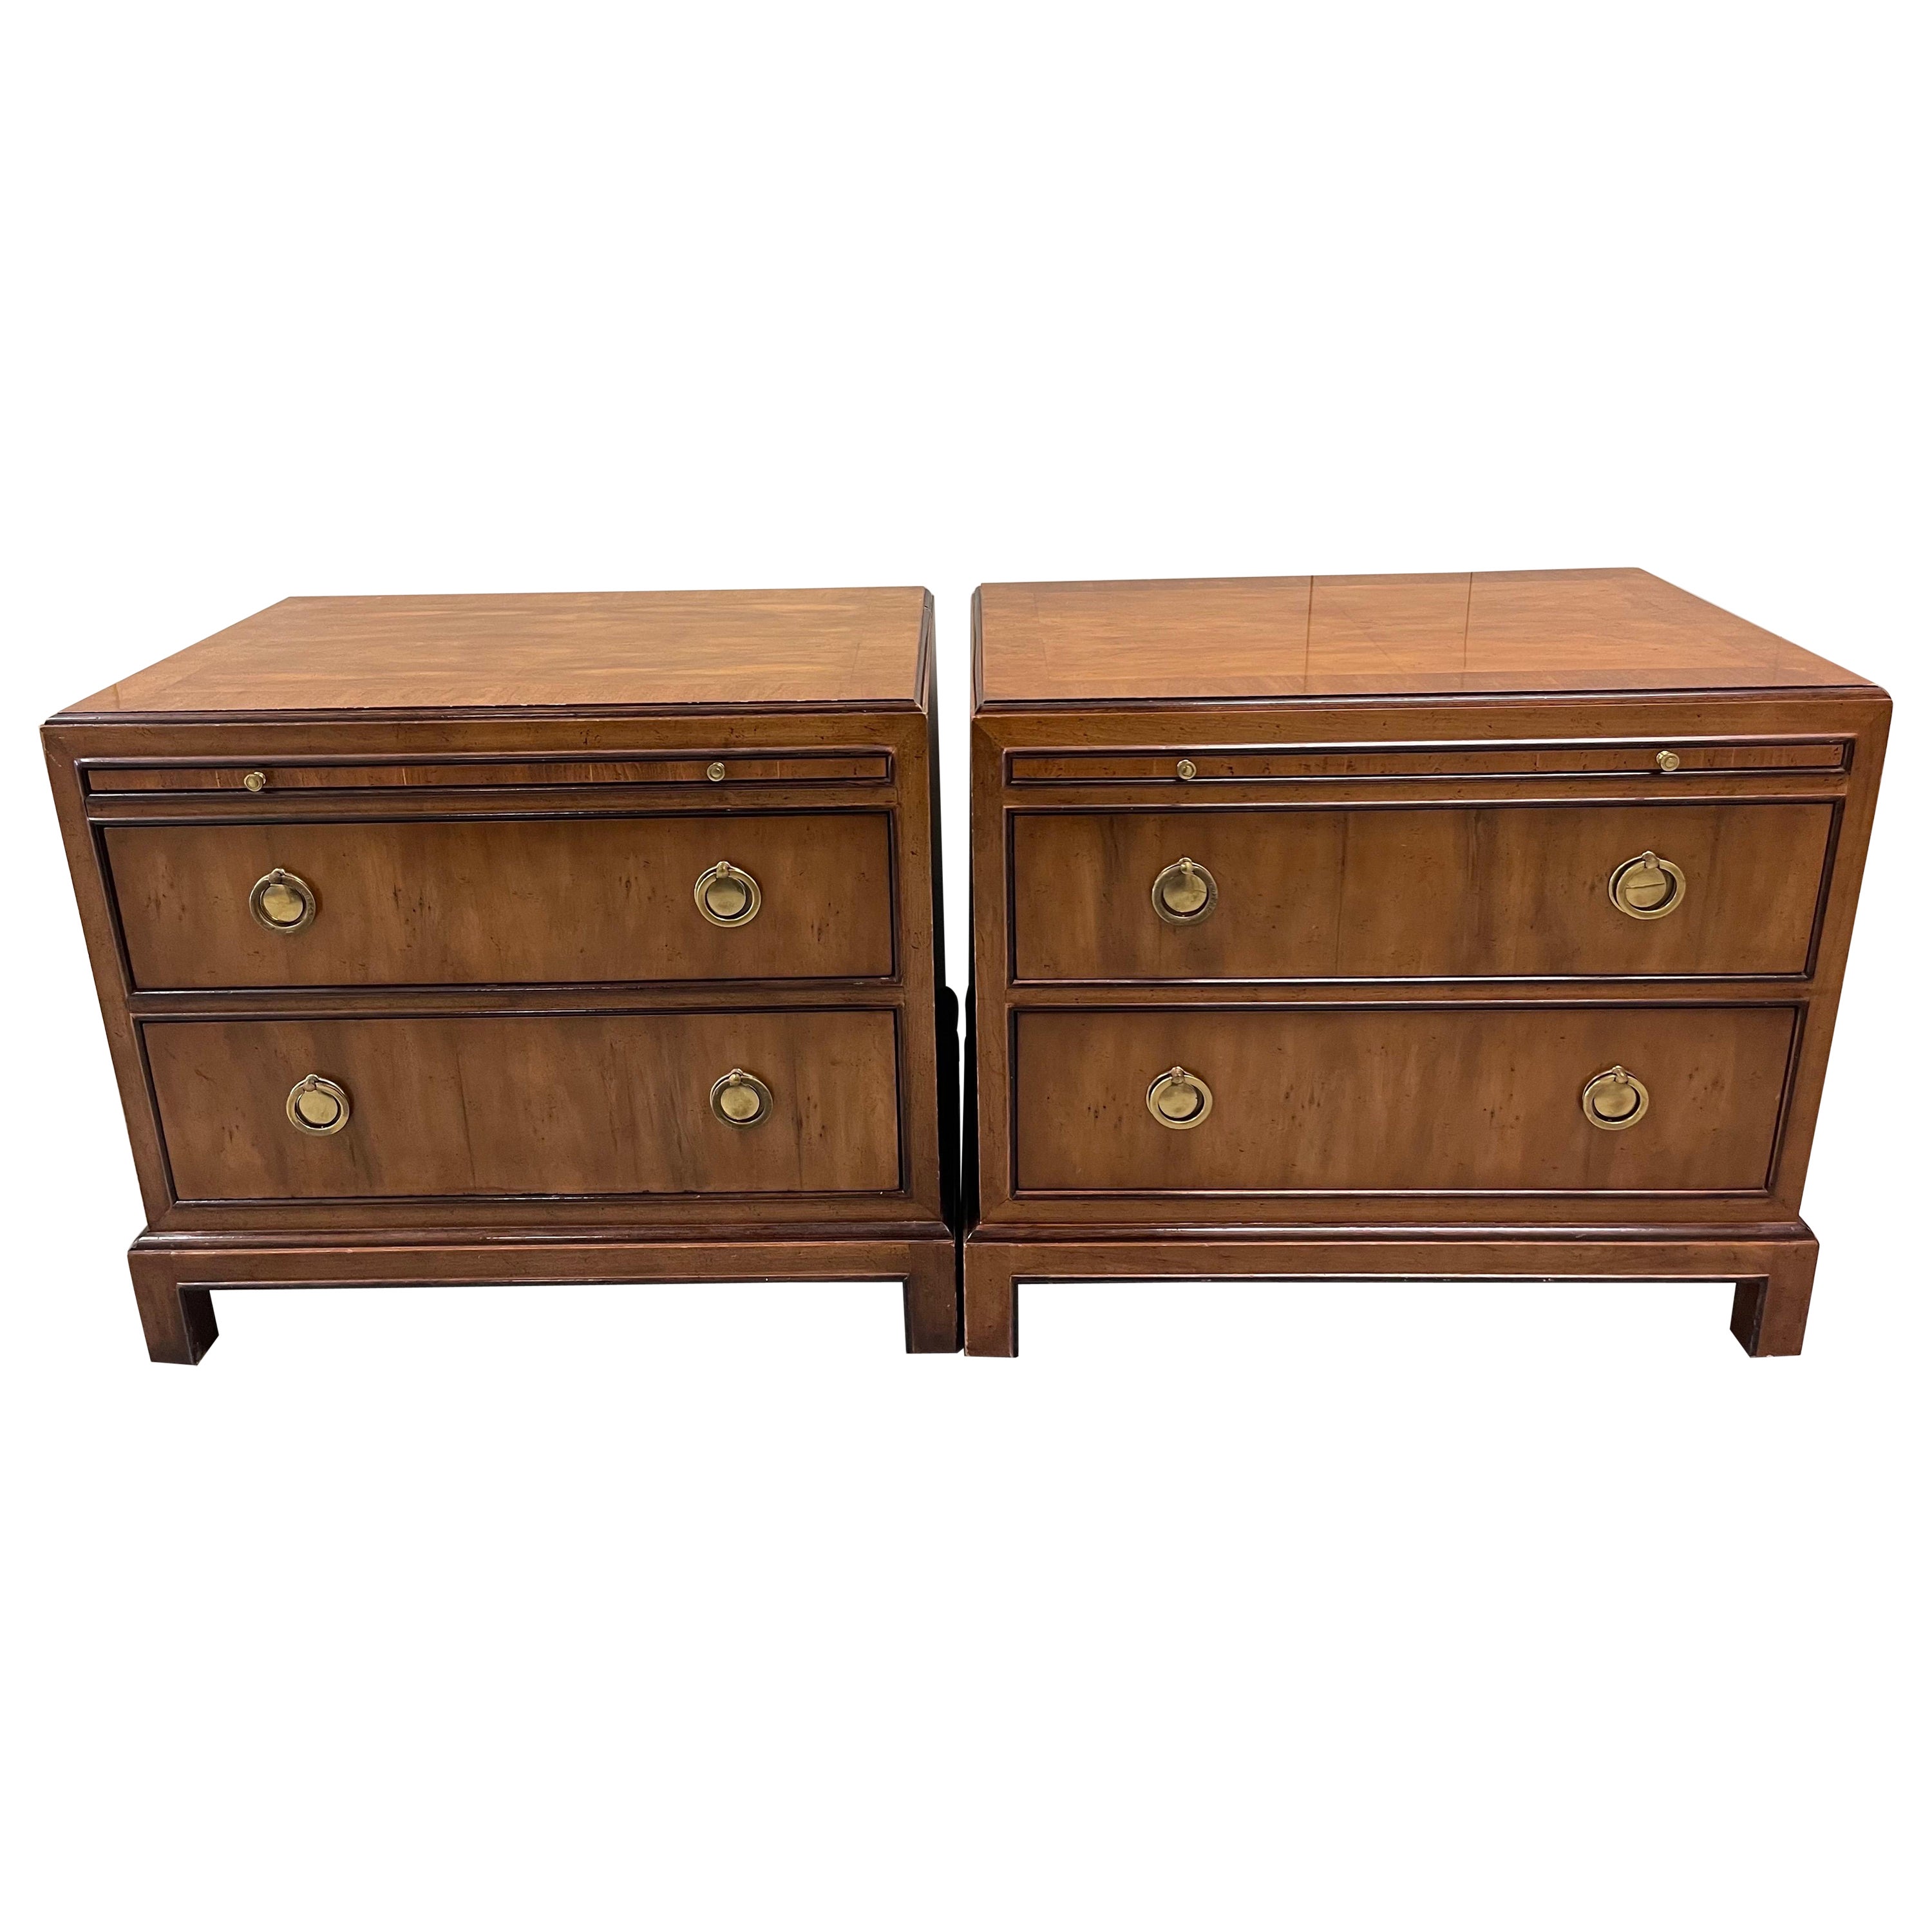 Drexel Heritage Campaign Style Burlwood Nightstands, Pair For Sale